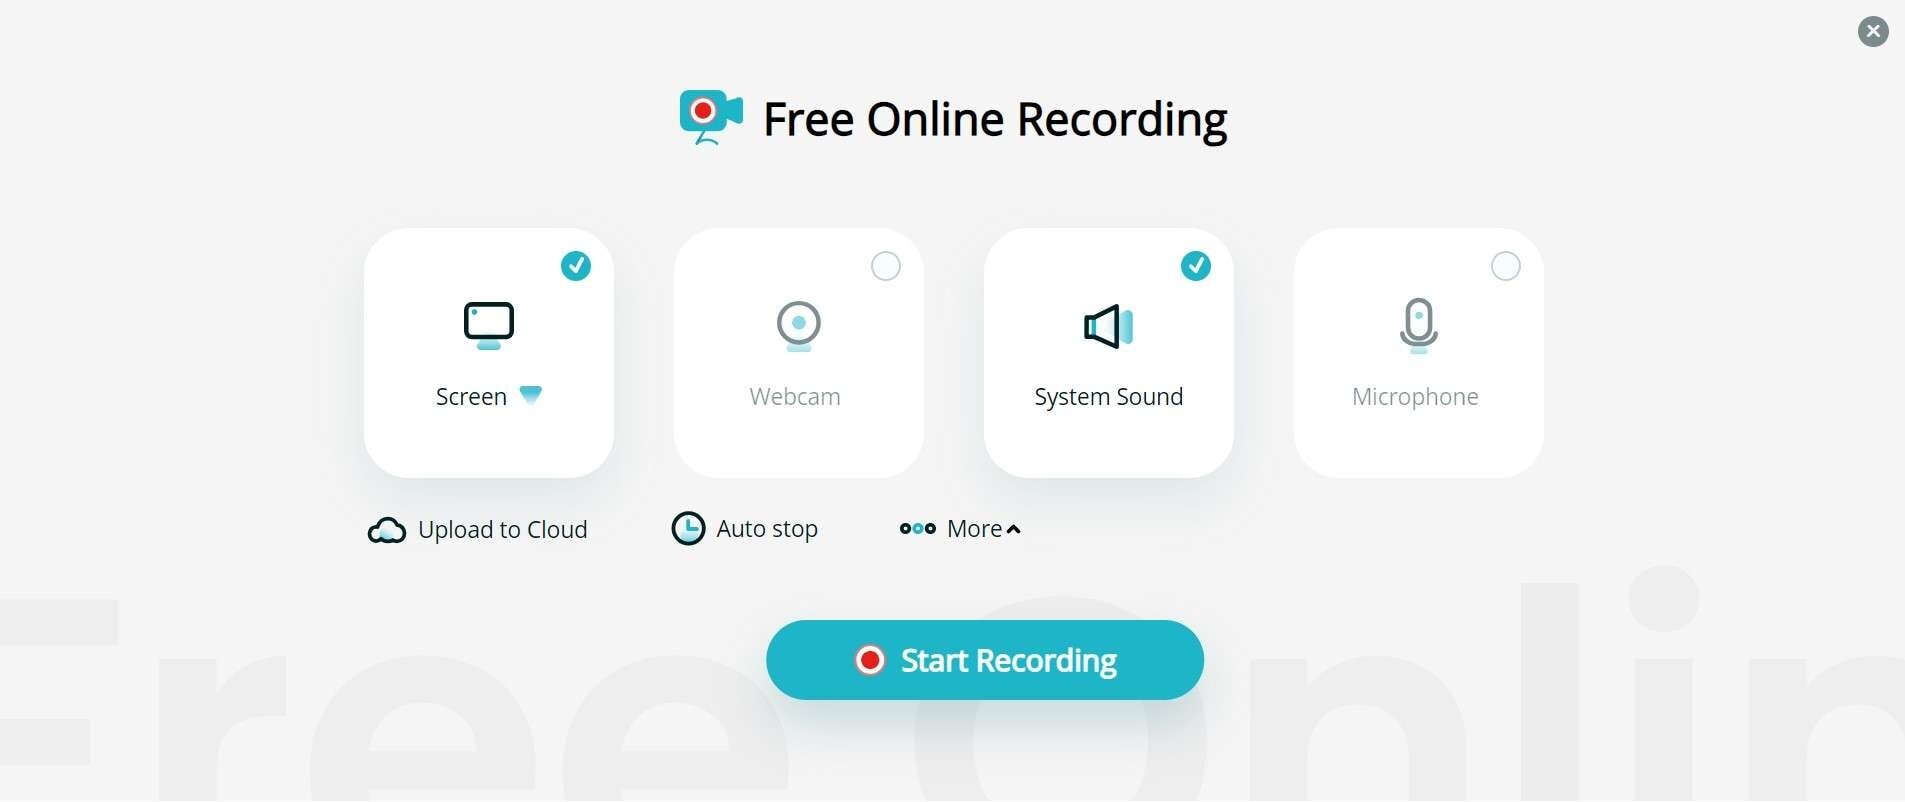 select preferences and start recording 